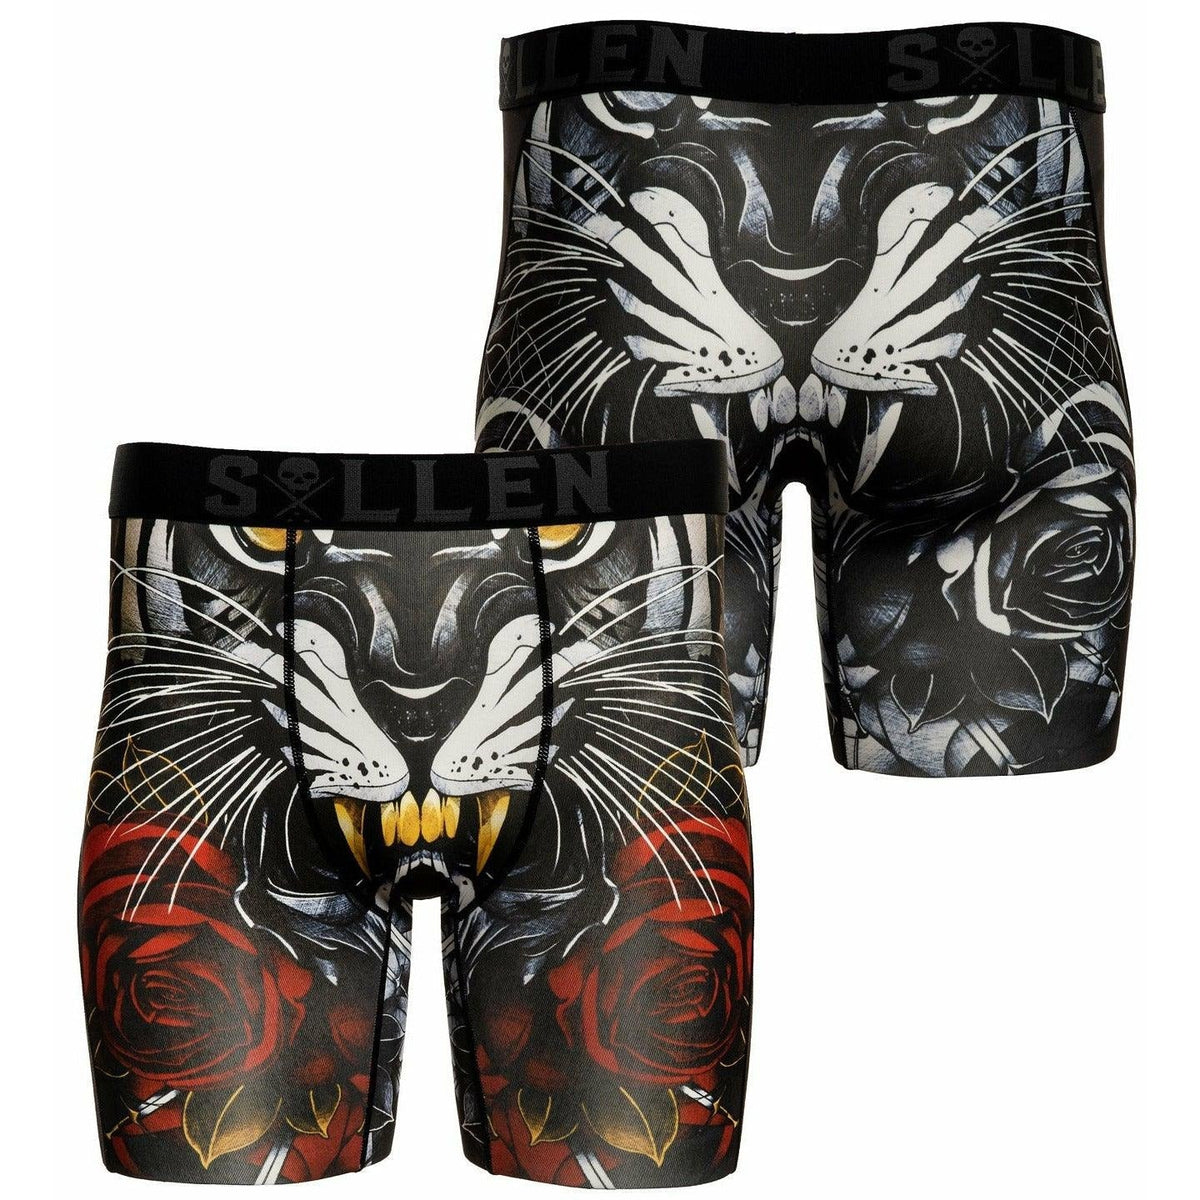 SULLEN-ART-COLLECTIVE-CLOTHING-TIGERS-AND-DAGGERS-BOXERS - UNDERWEAR - Synik Clothing - synikclothing.com